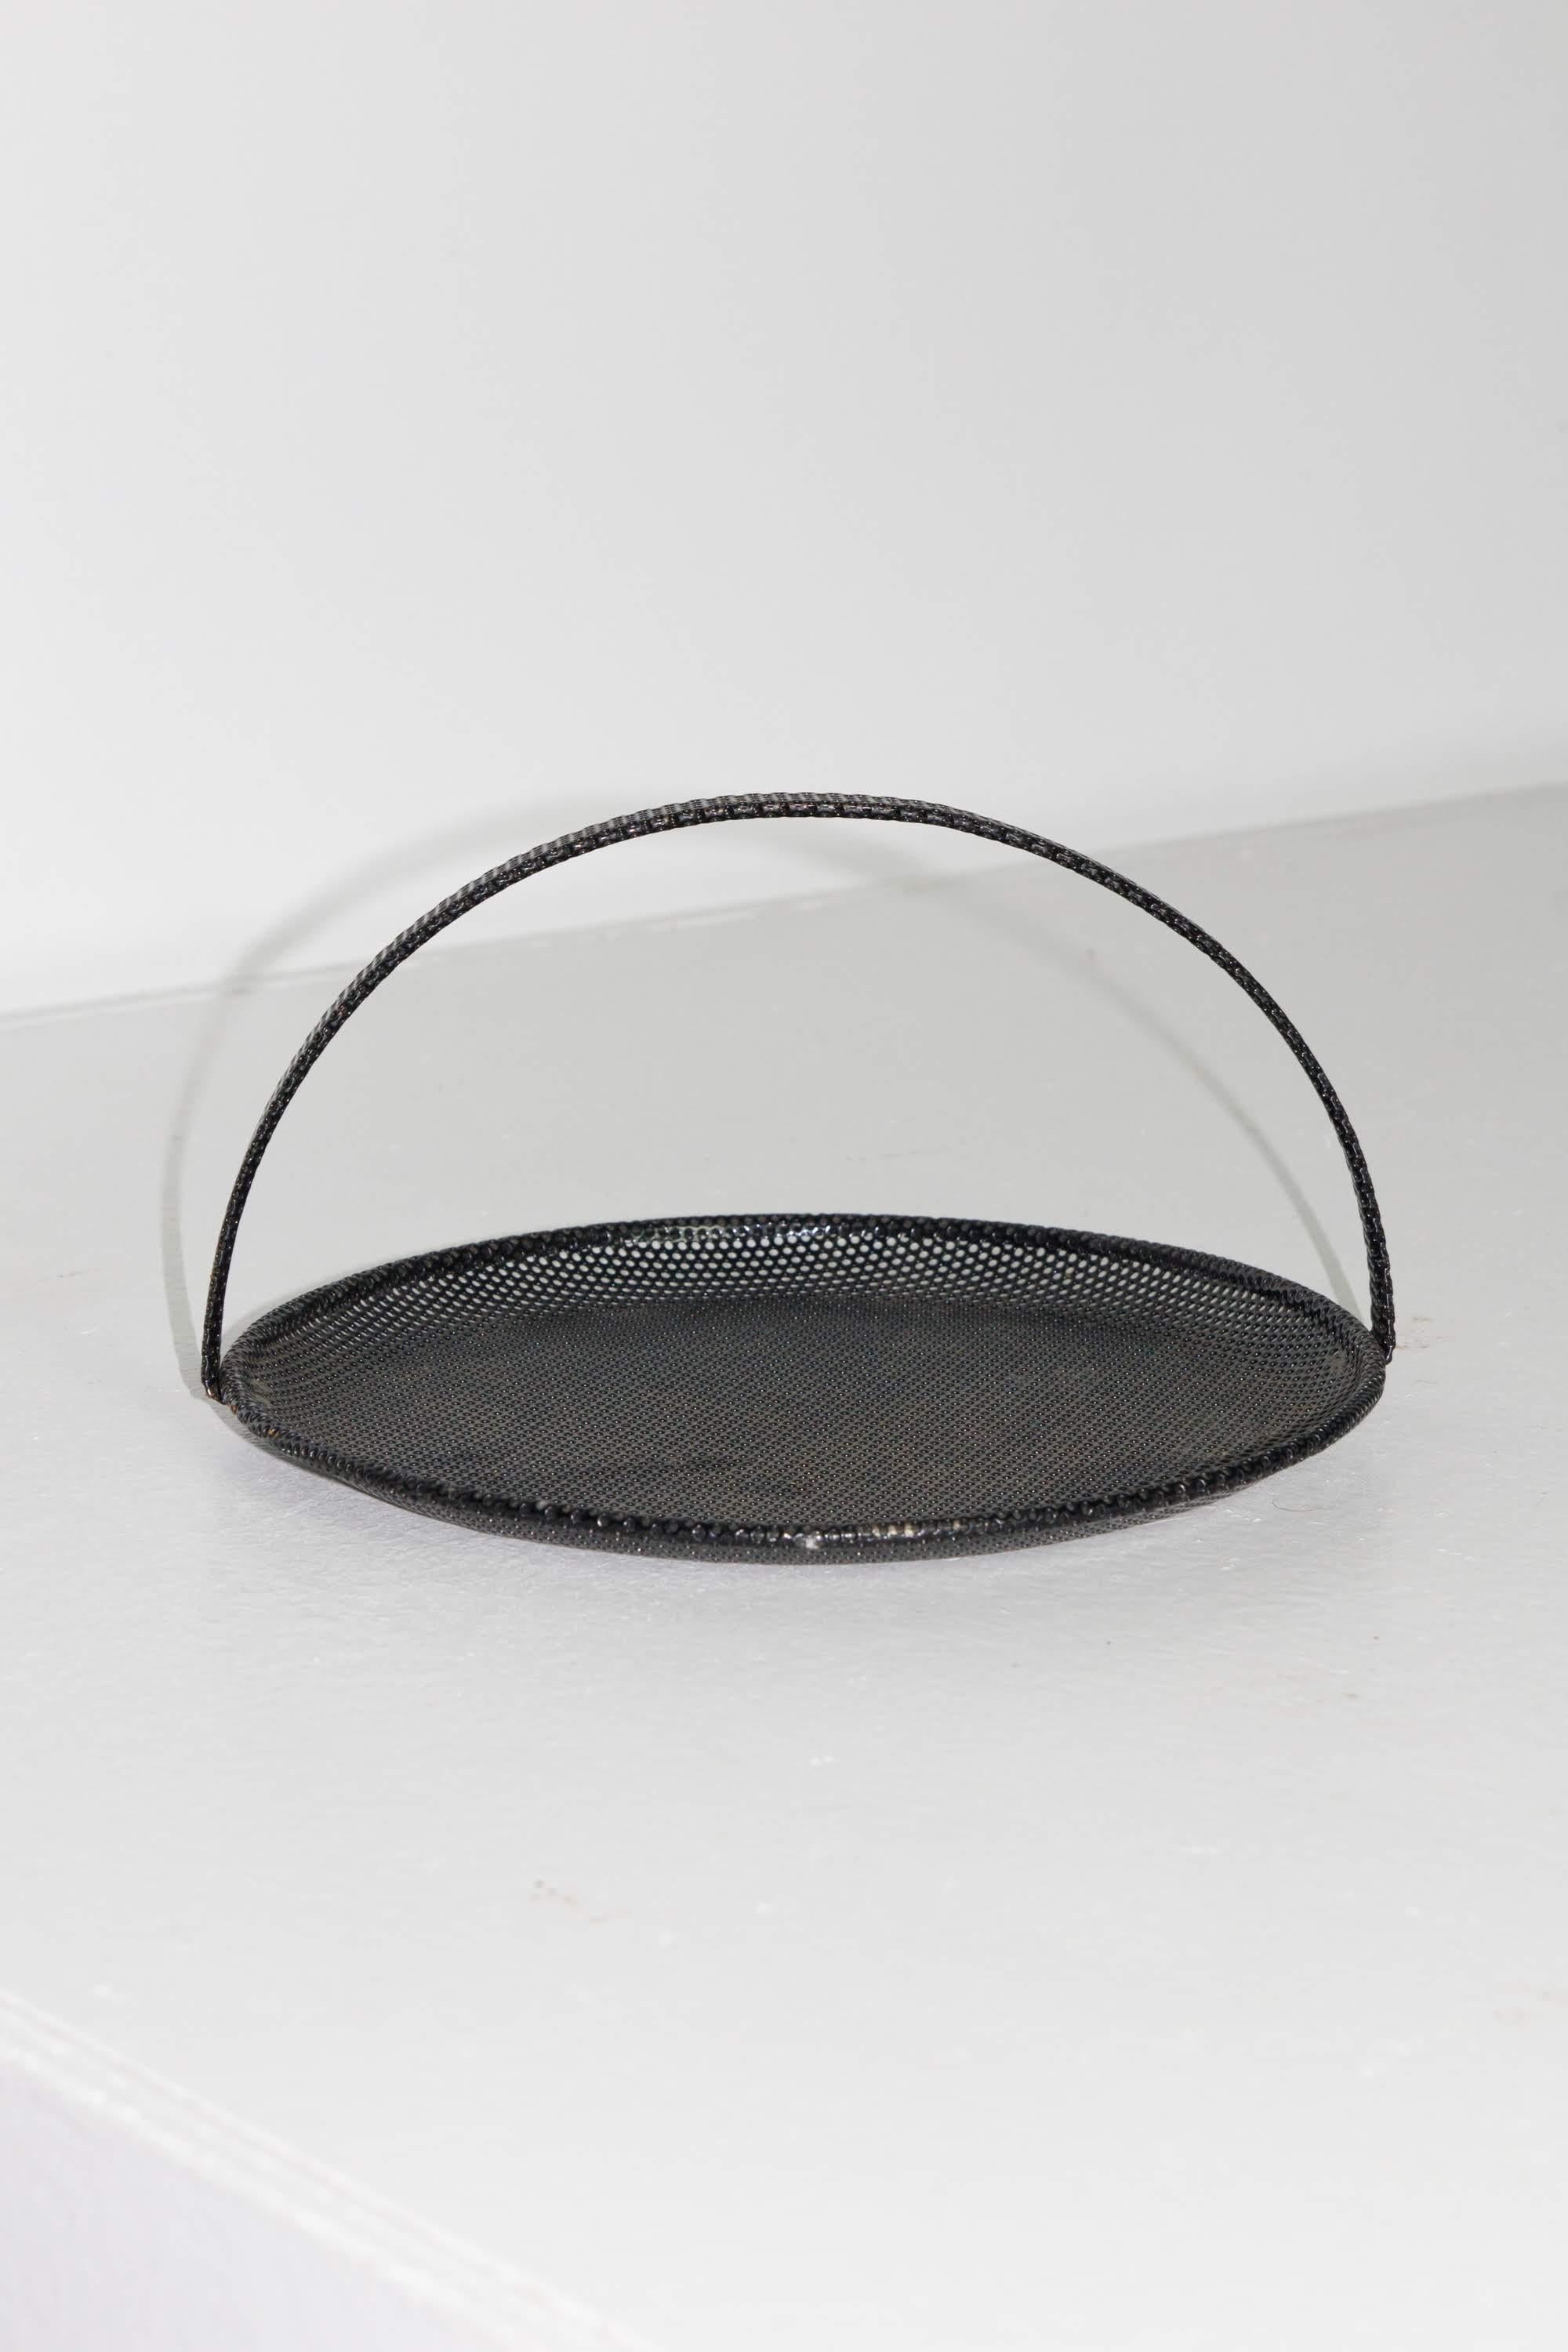 Black perforated metal tray with handle designed by Mathieu Matégot for Artimeta.